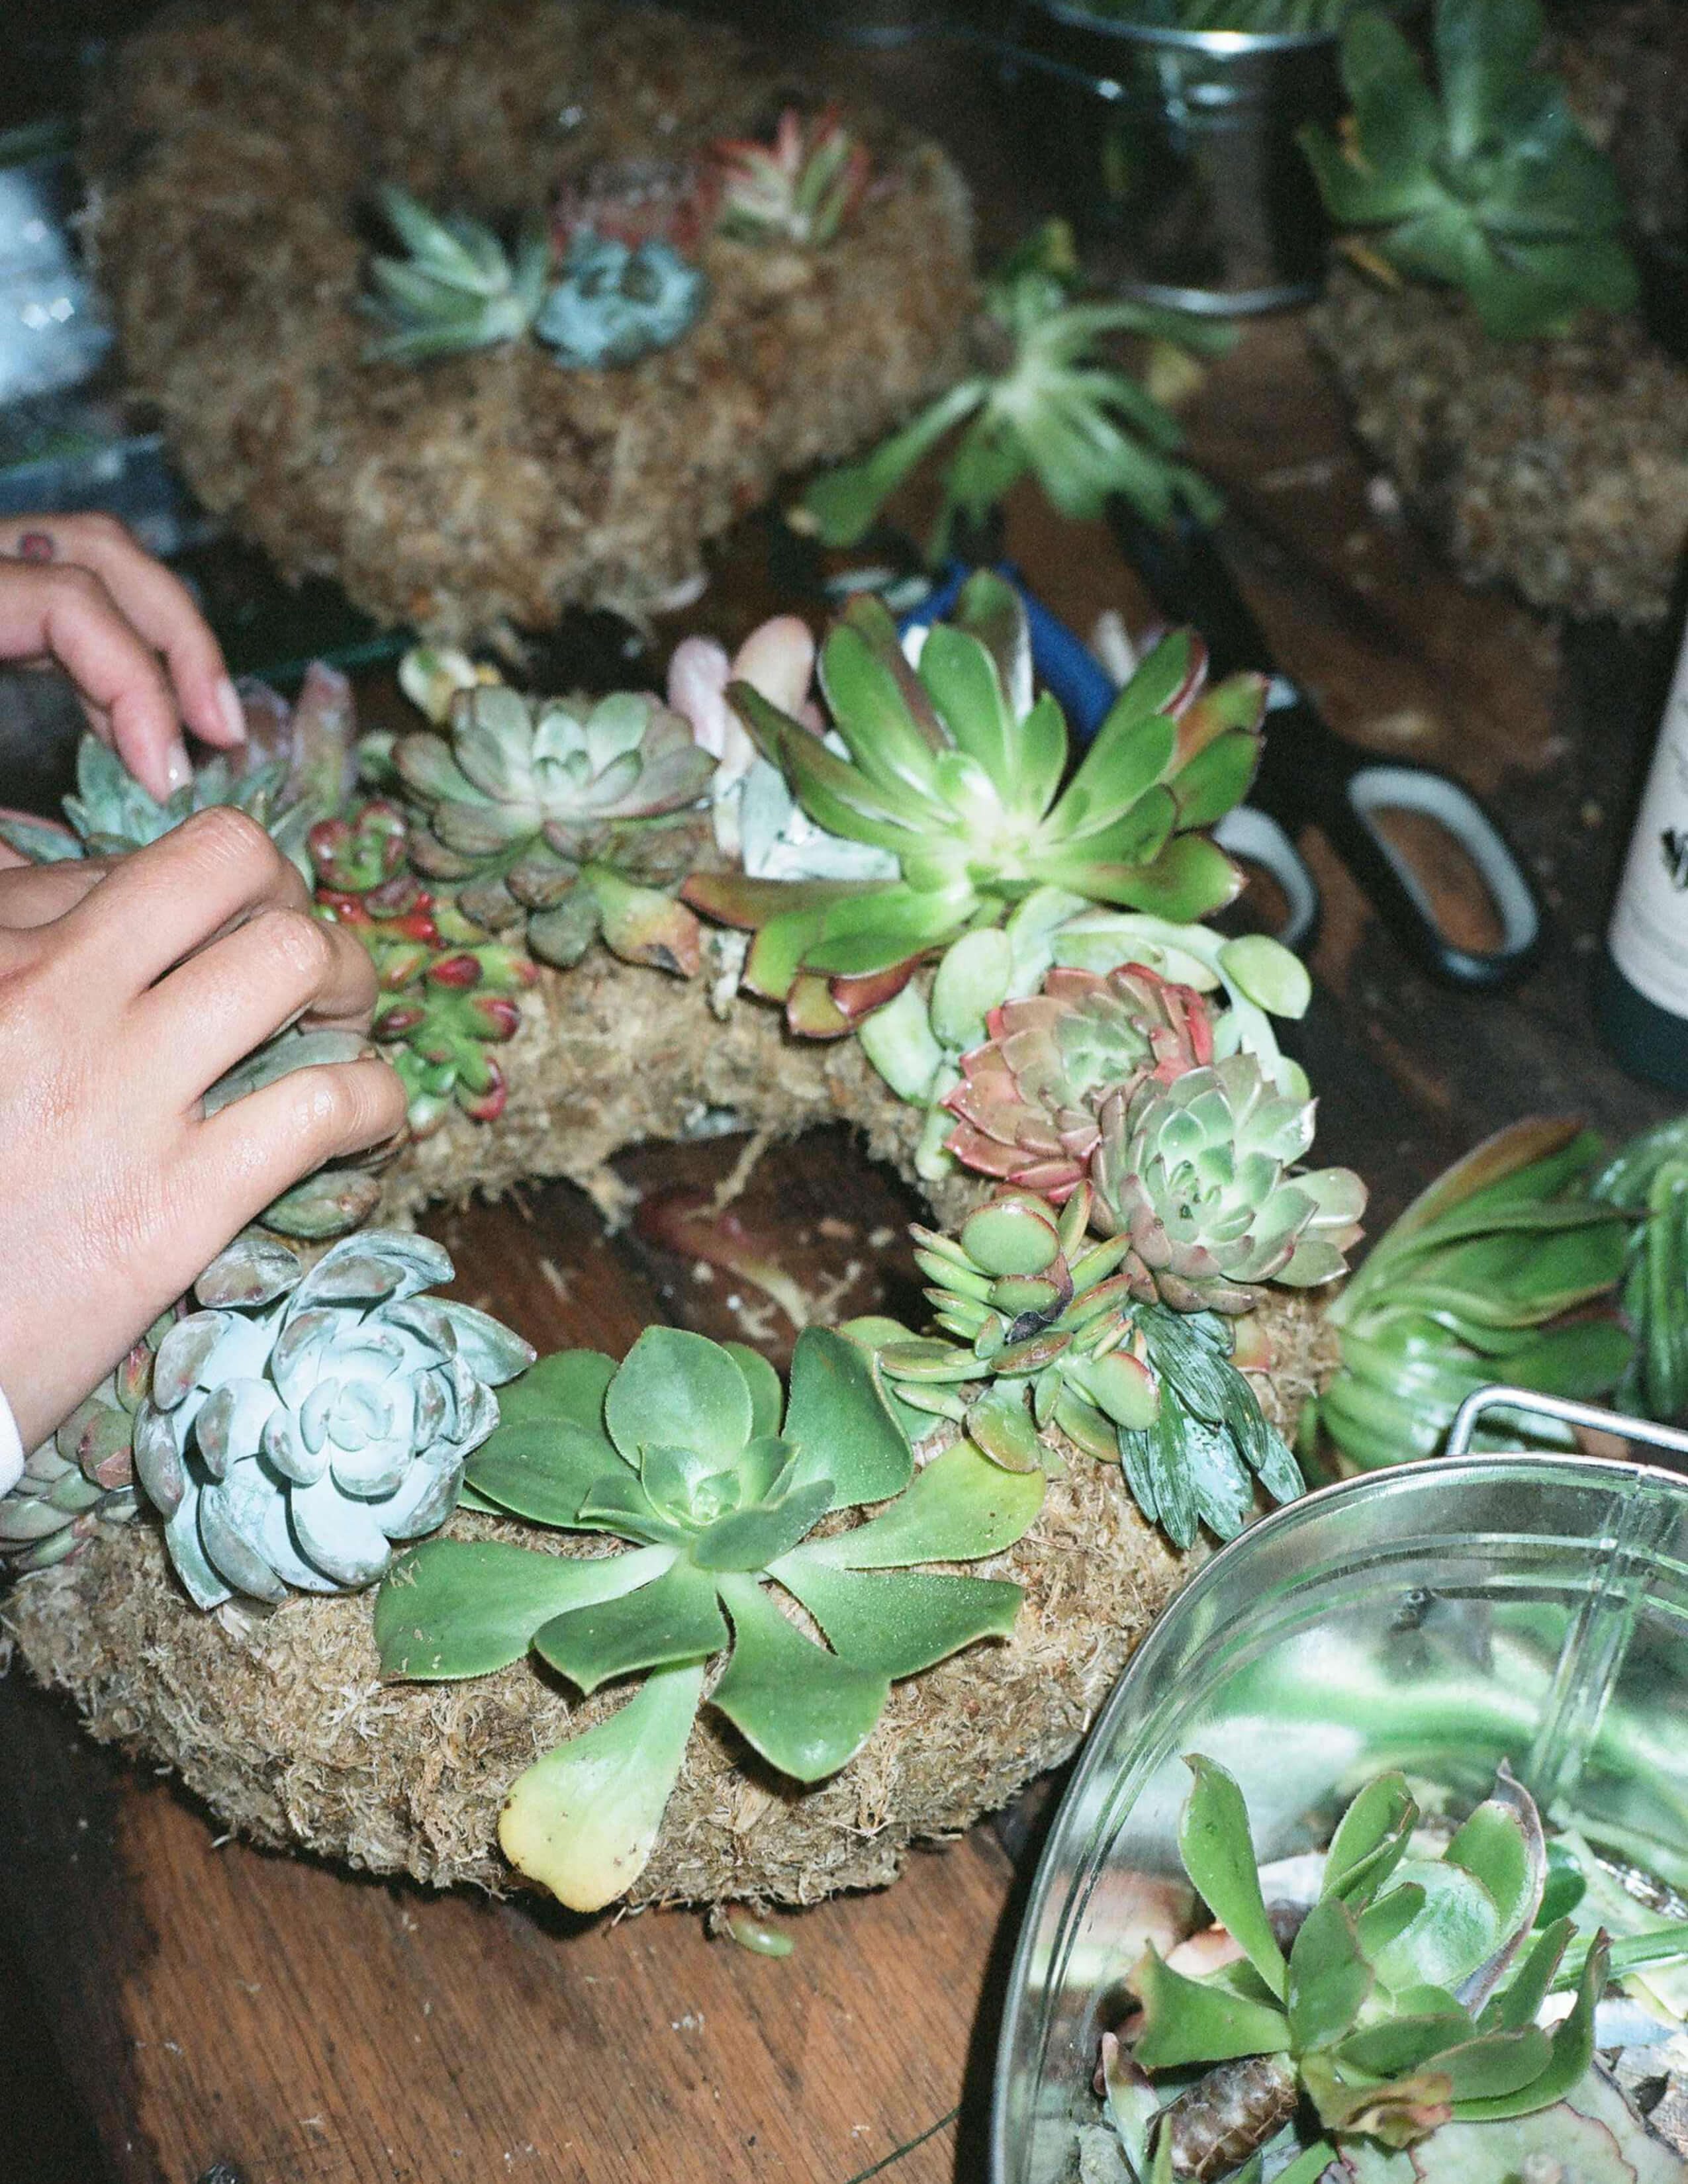 Progress of making succulent wreath on the table.